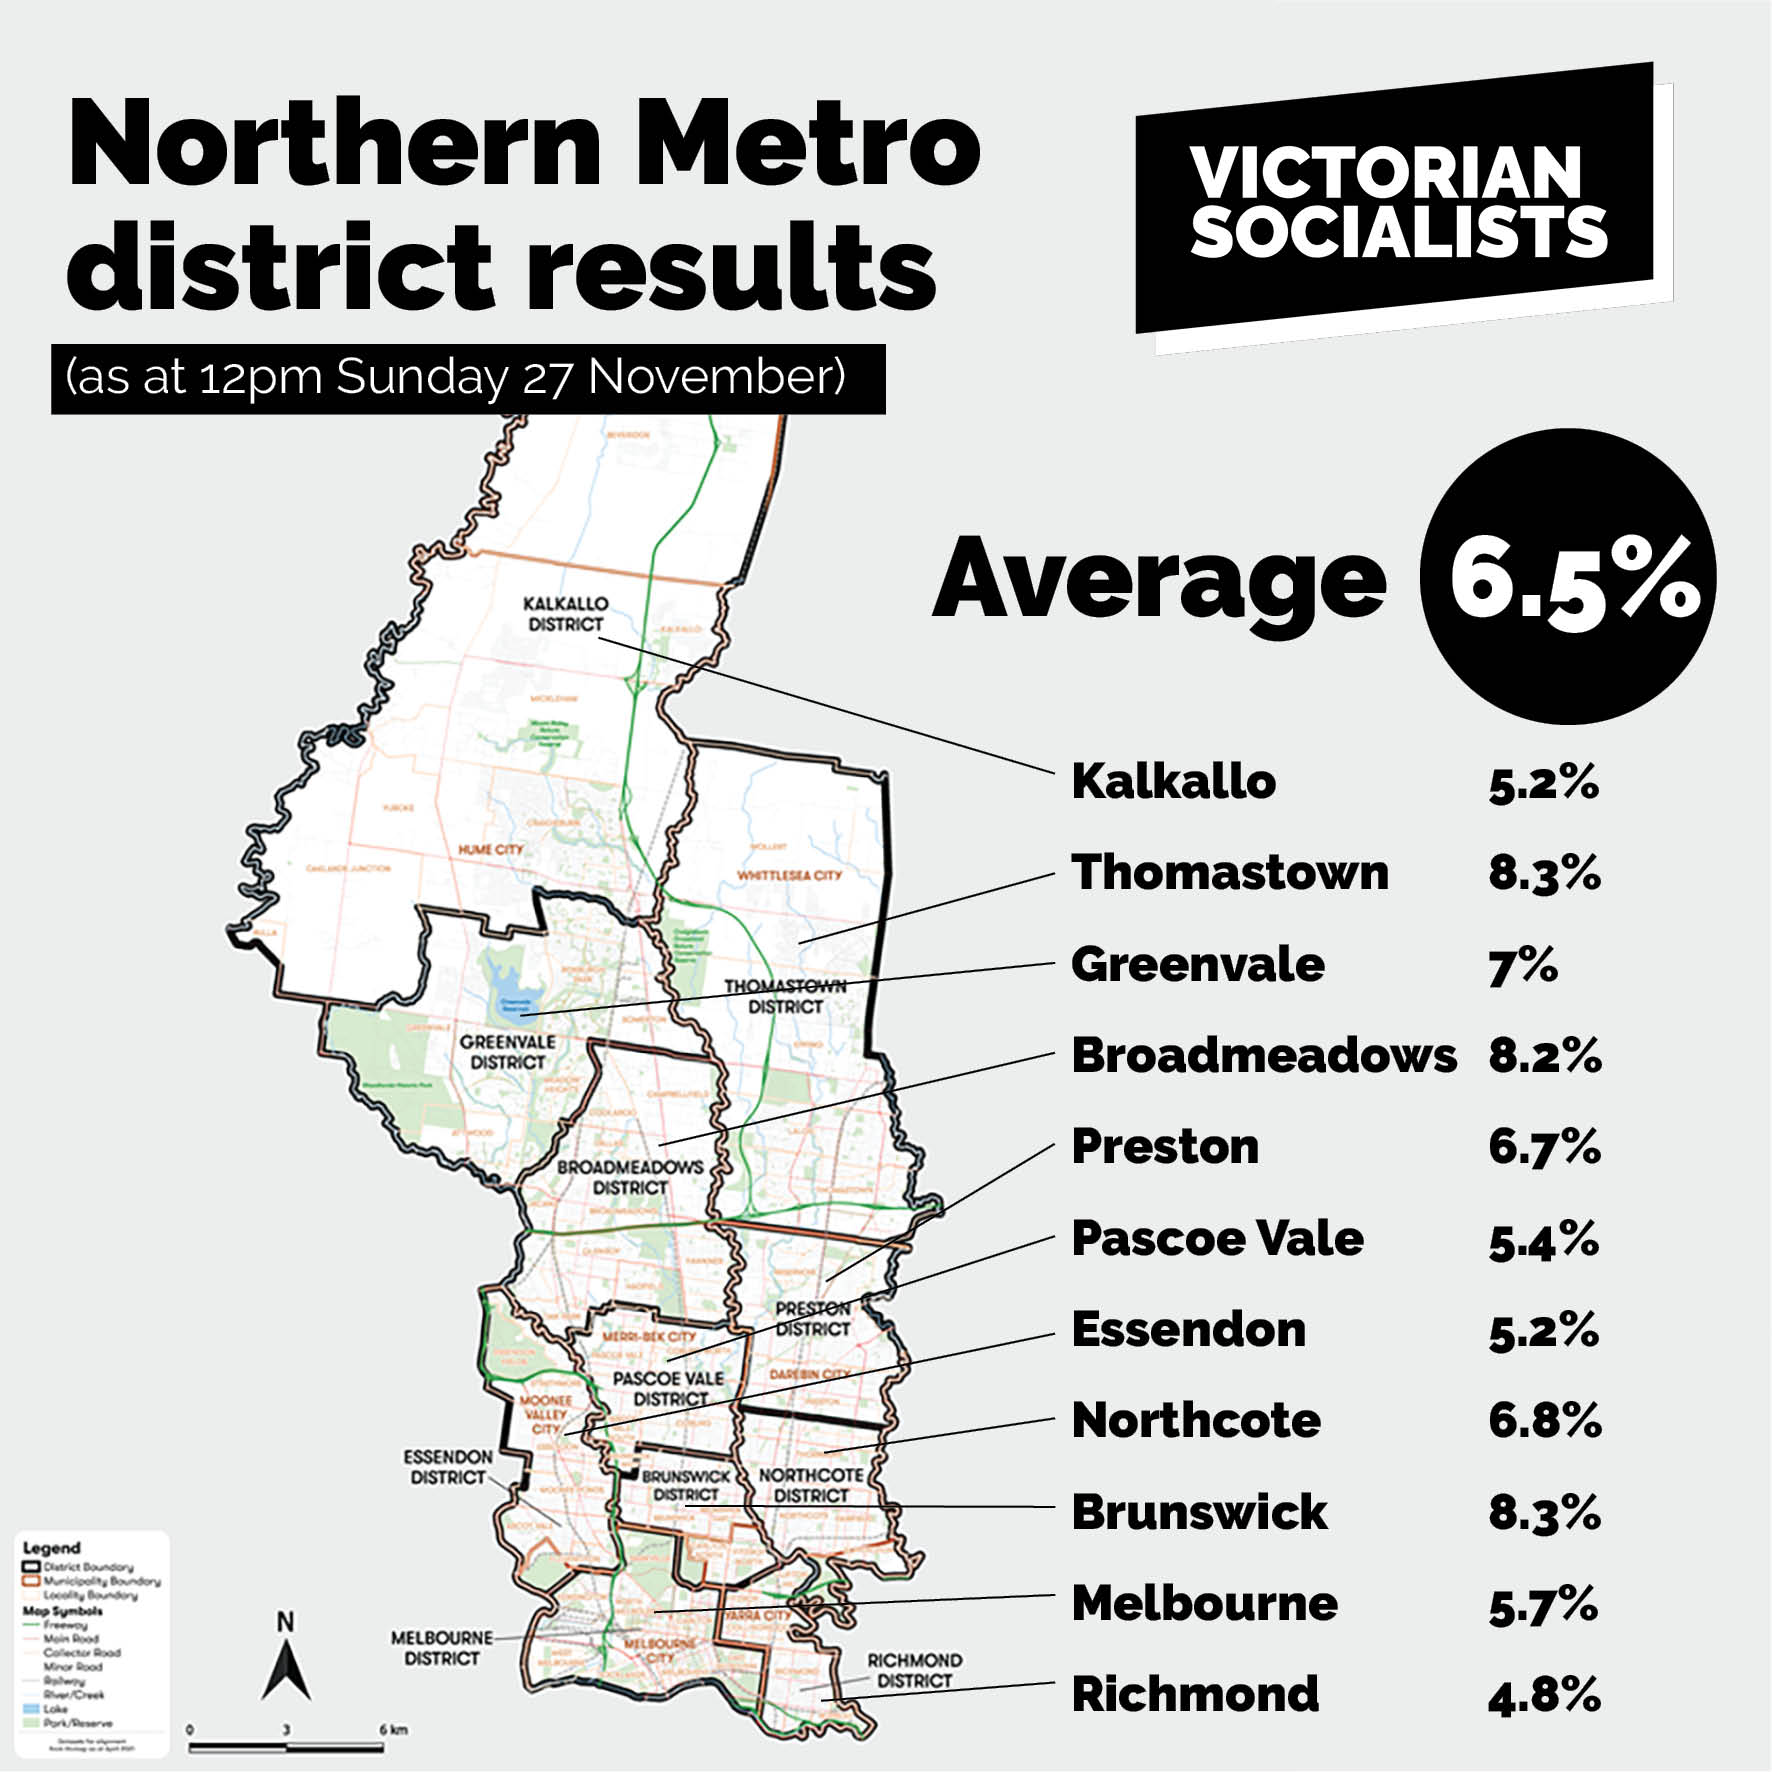 An overview of VS lower house results in the Northern Metro Region